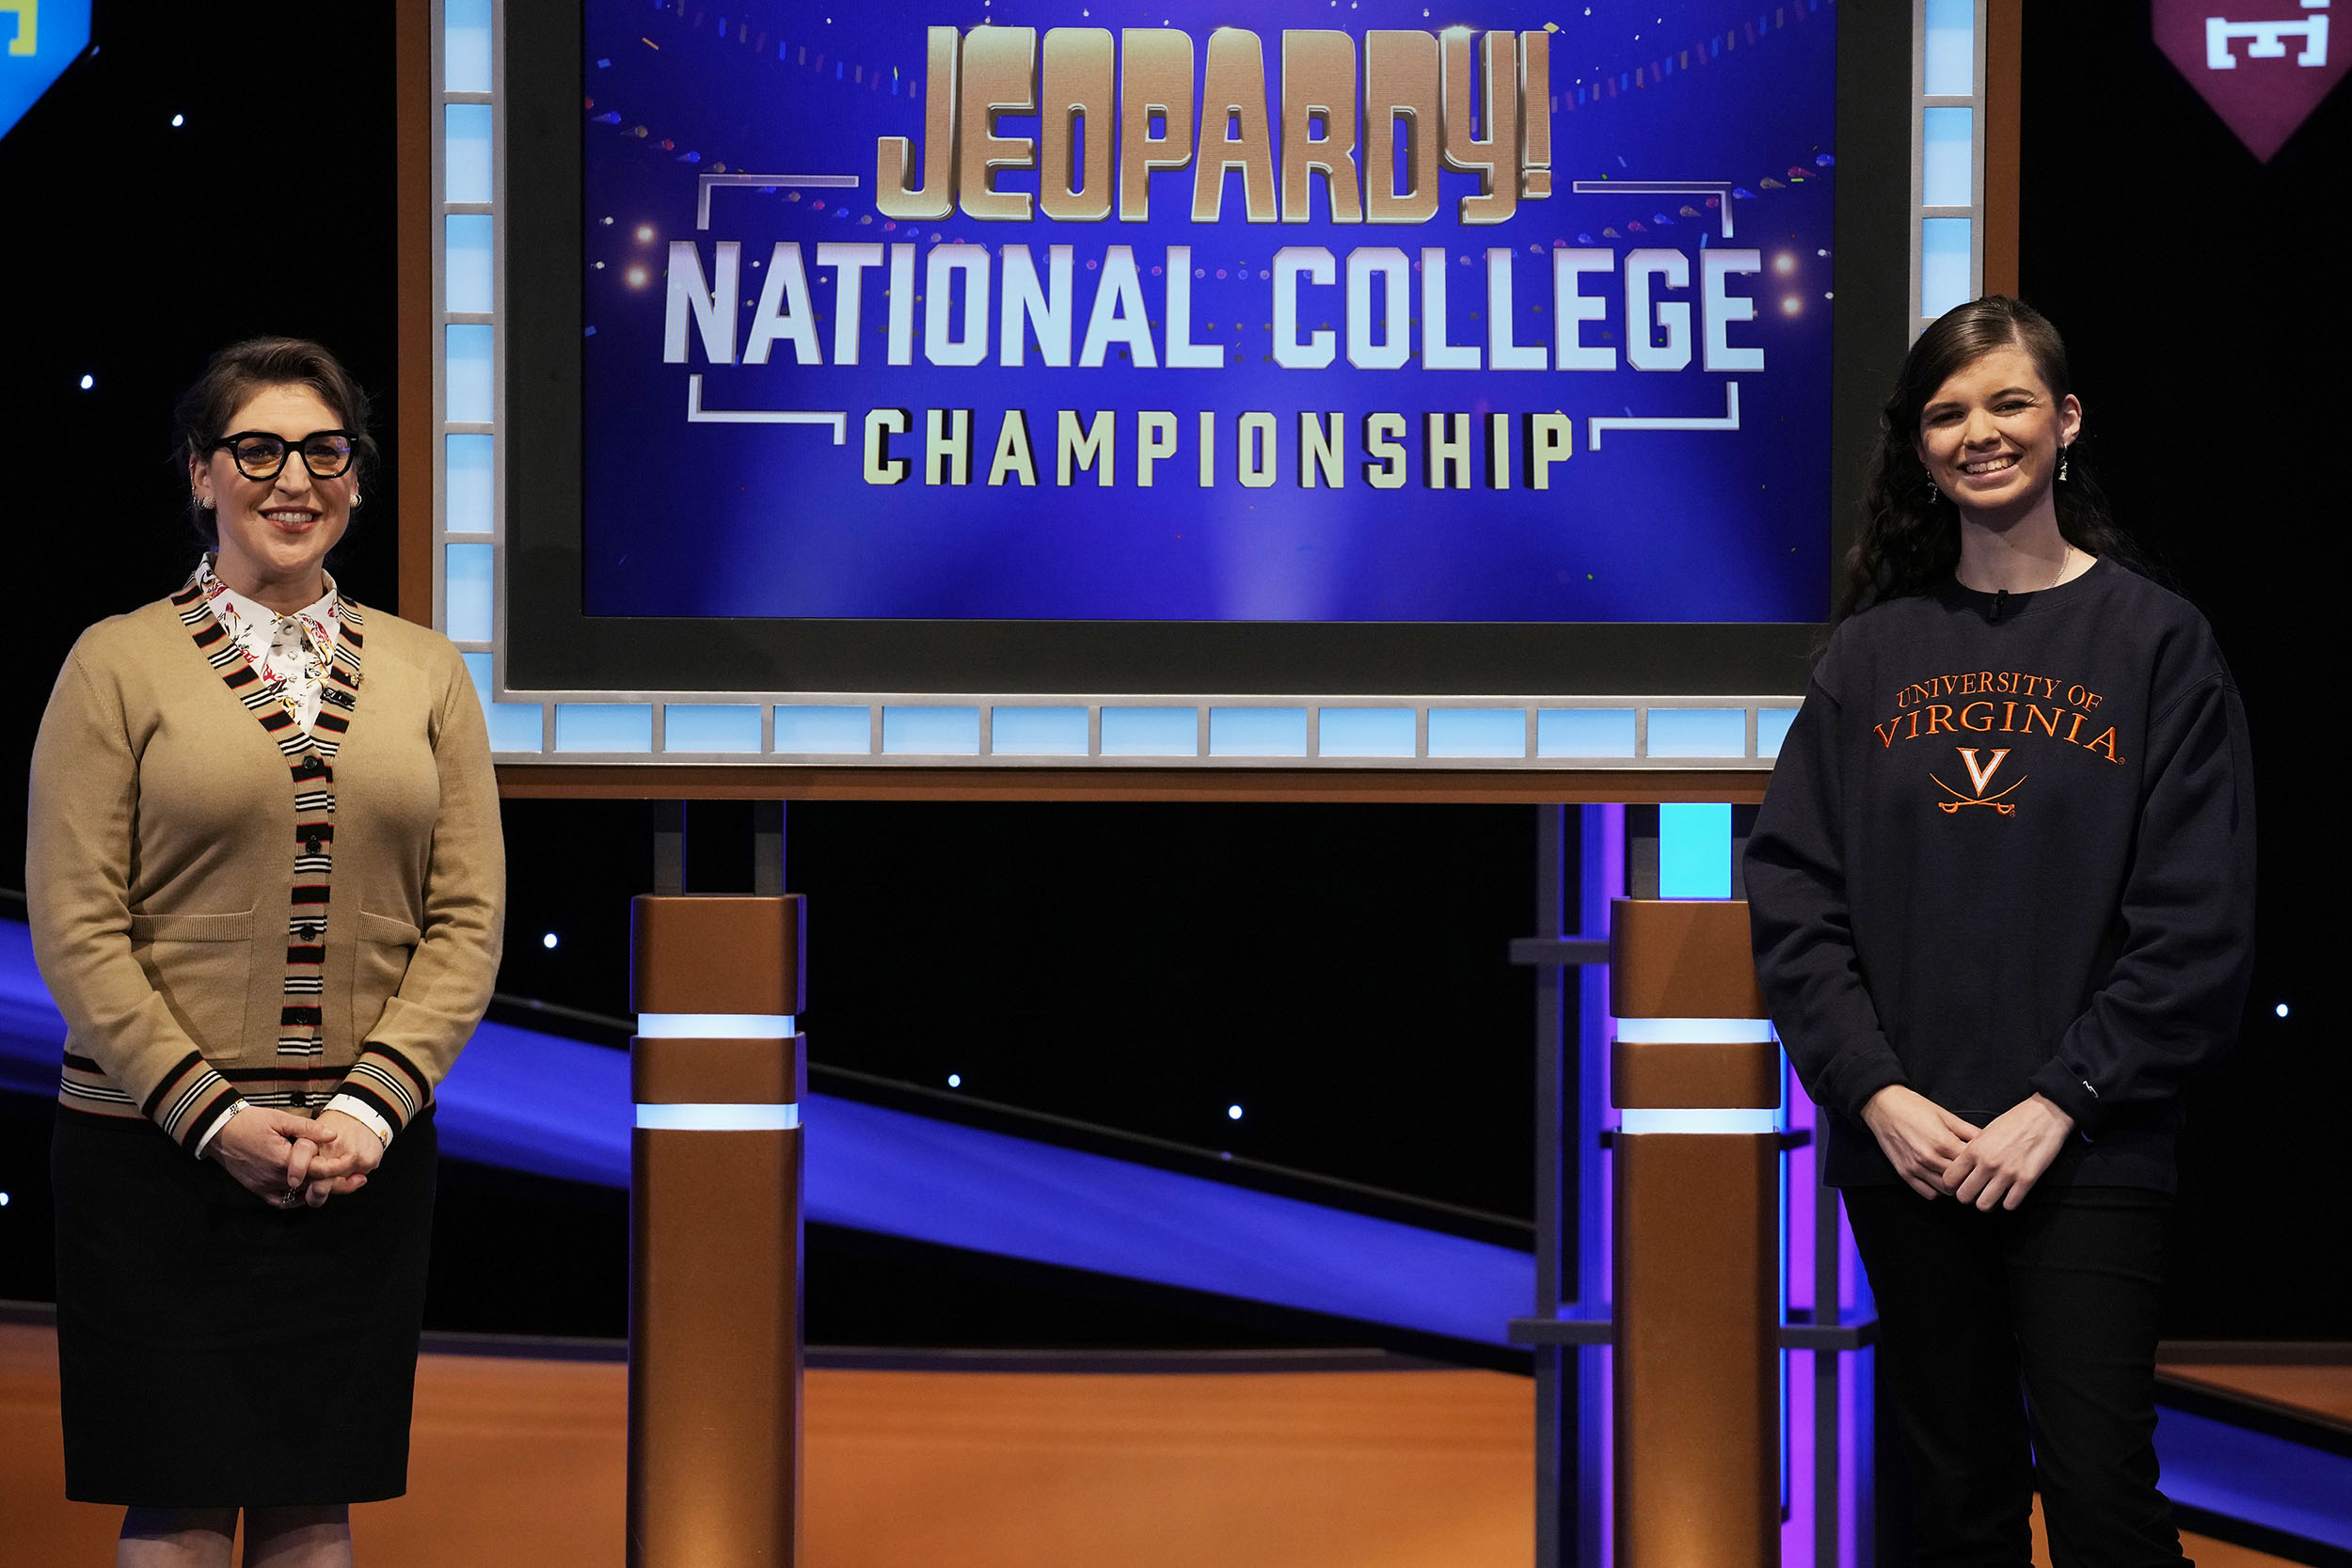 Mayim Bialik on the left and Megan Sullivan on the right with a screen in the middle that reads Jeopardy! National College Championship